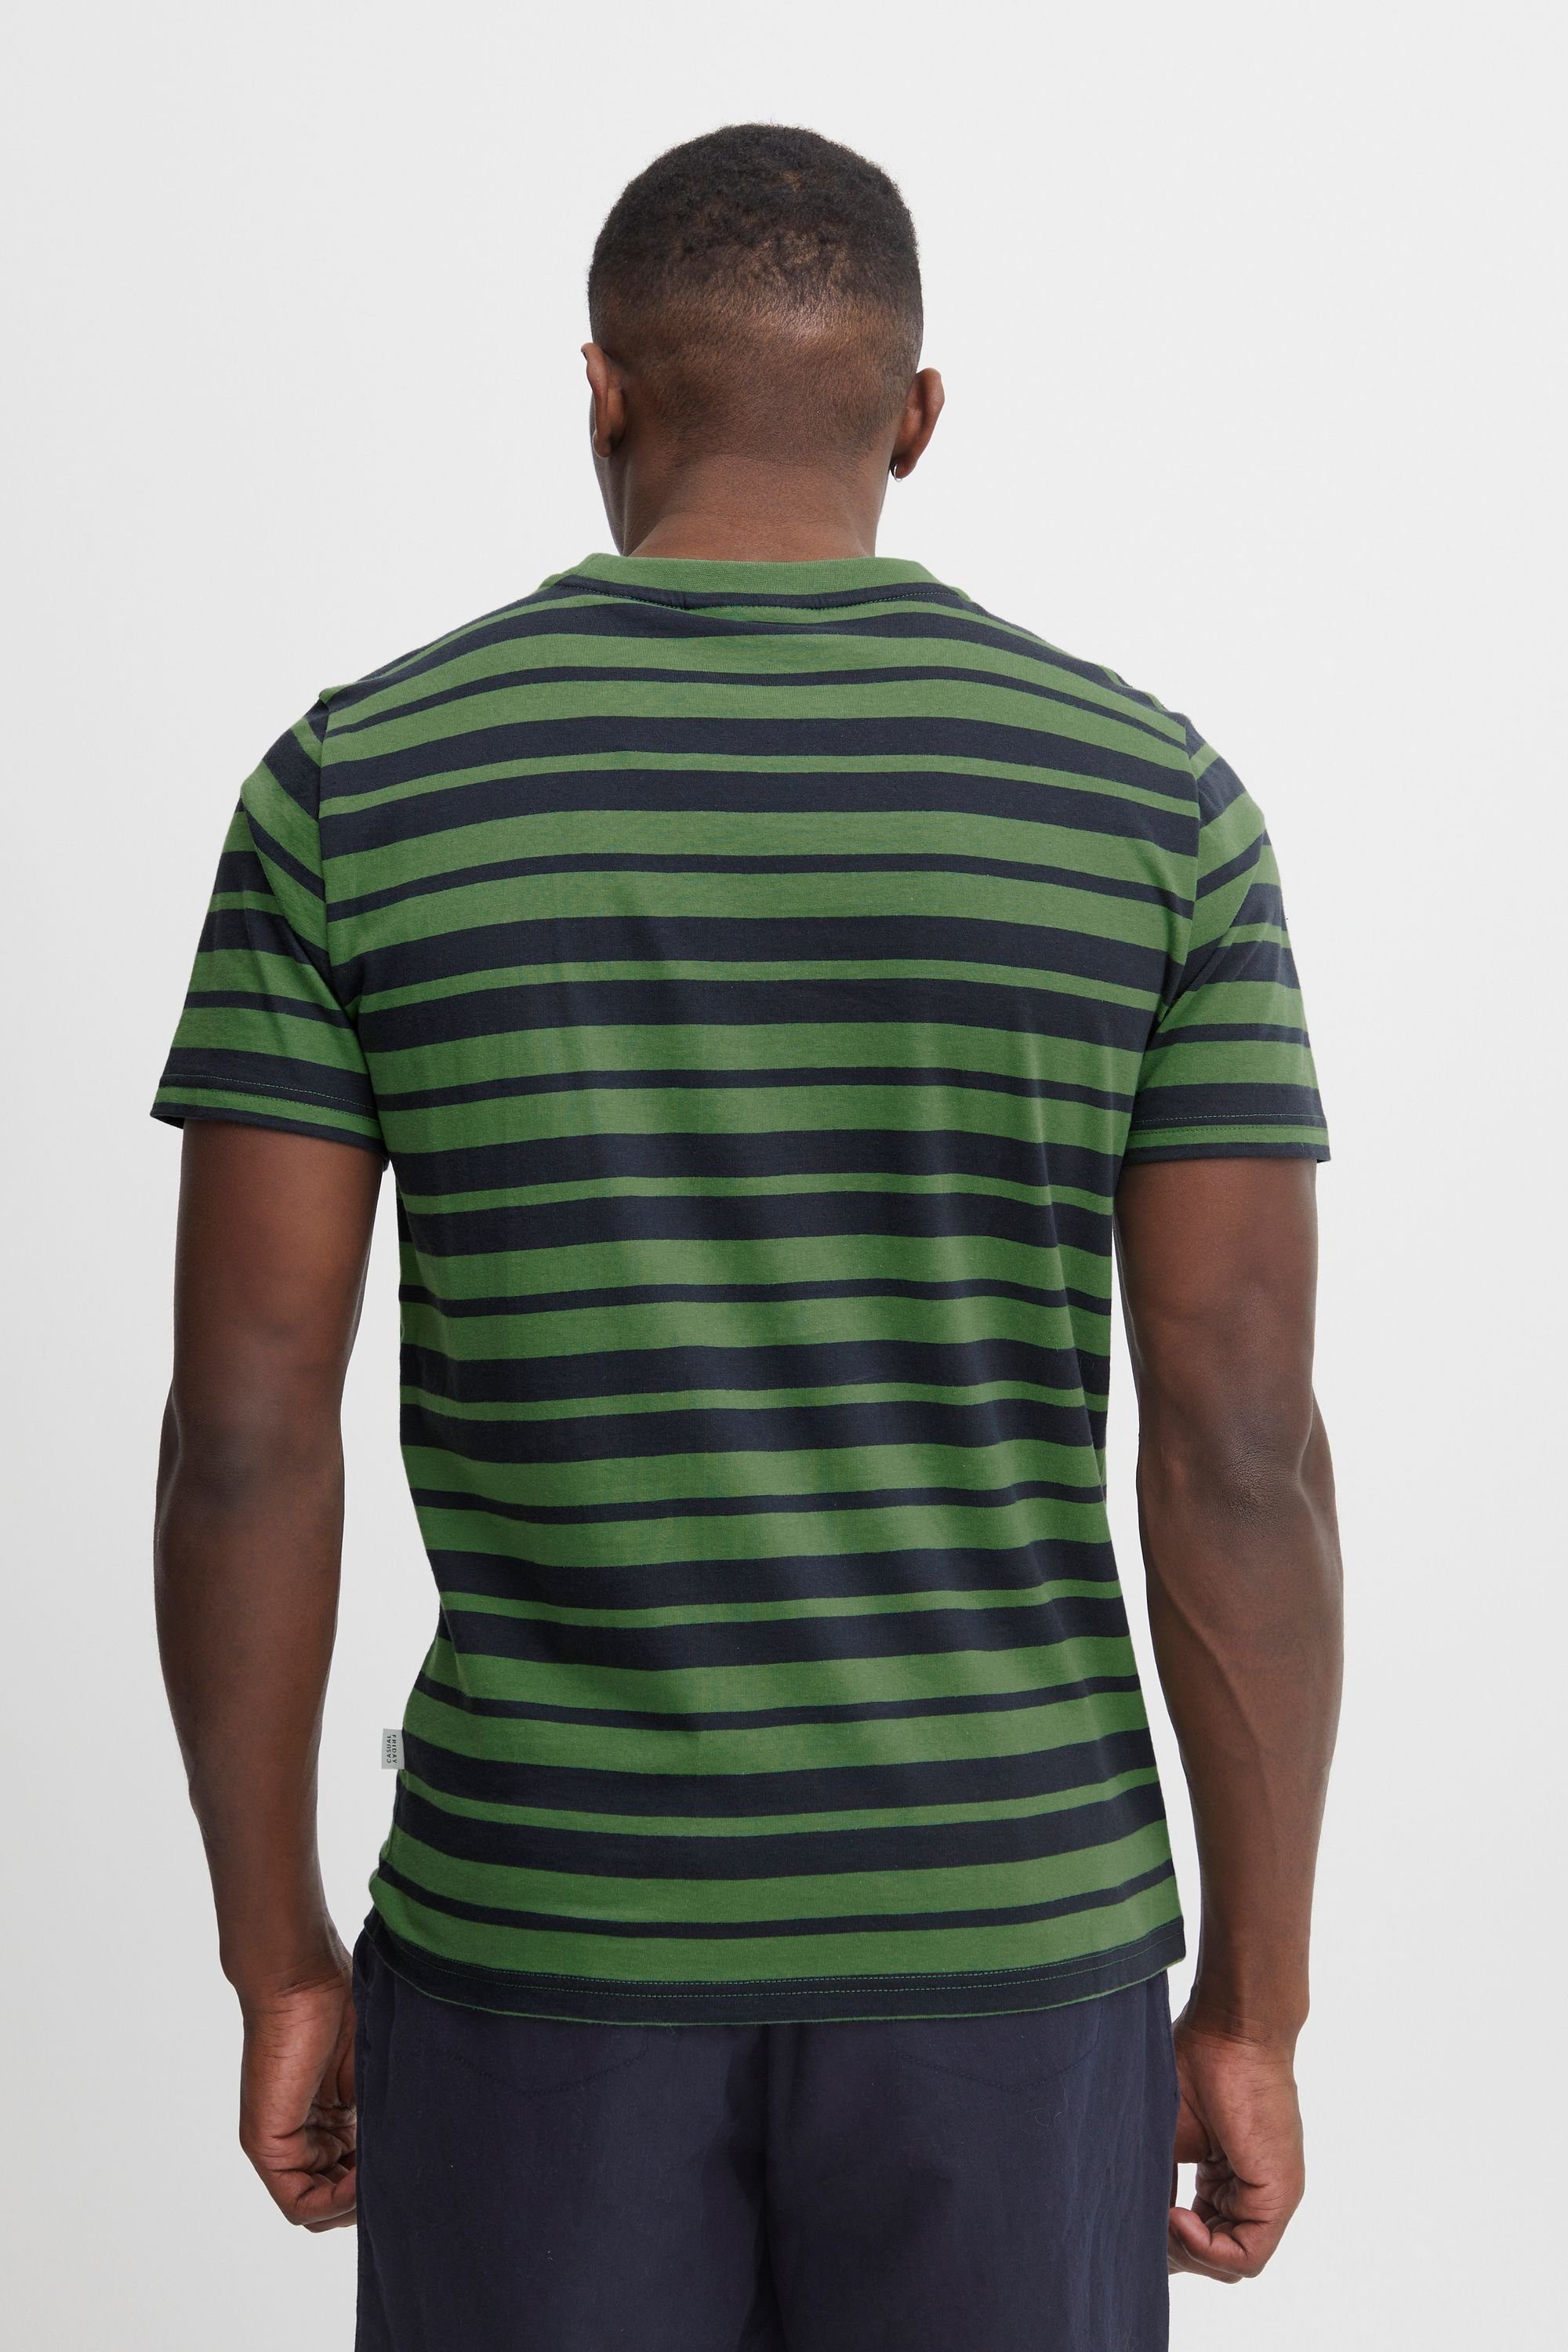 CFThor (180121) - 0059 tee Casual Elm striped Green Friday 20504603 Y/D T-Shirt